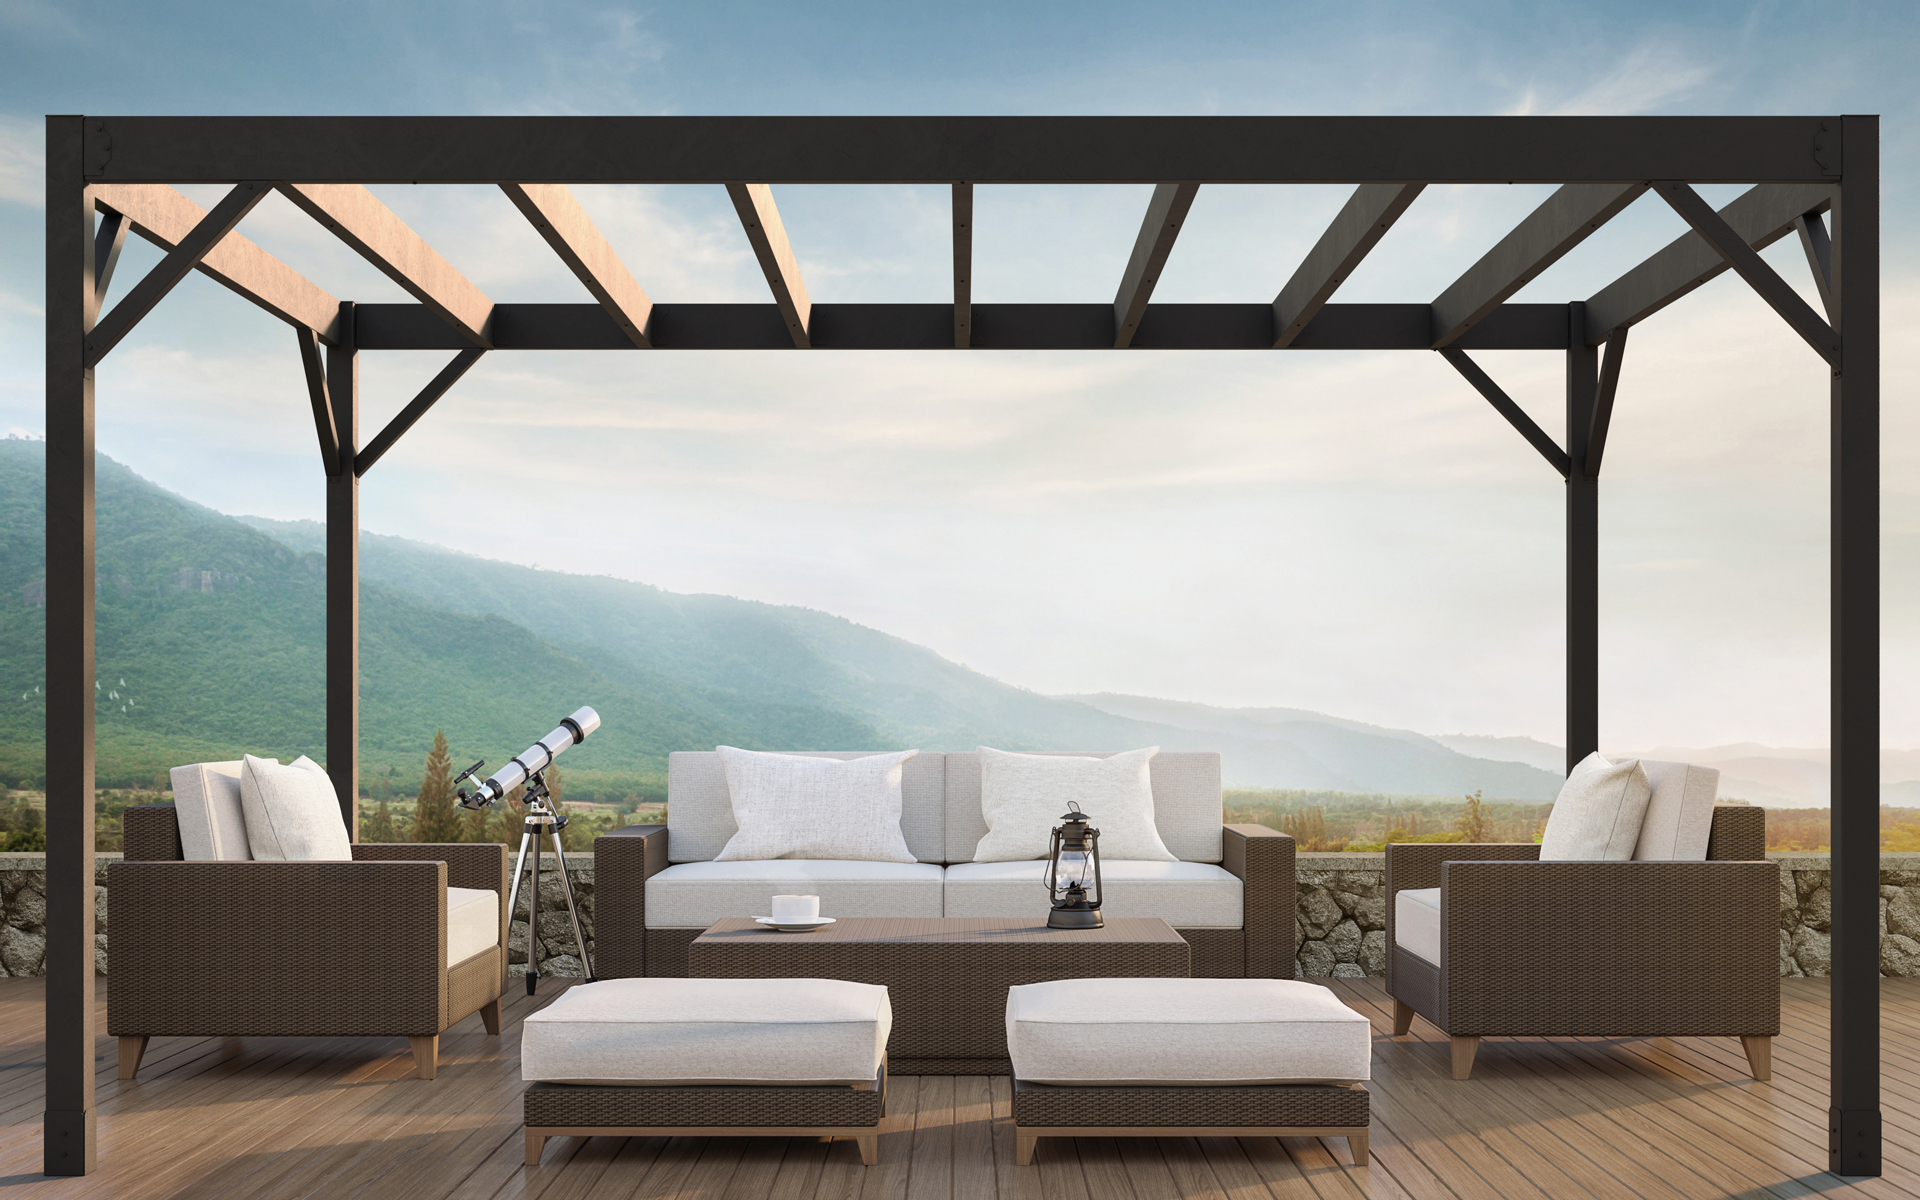 Modern pergola creating an outdoor living space with white couches and mountain views.